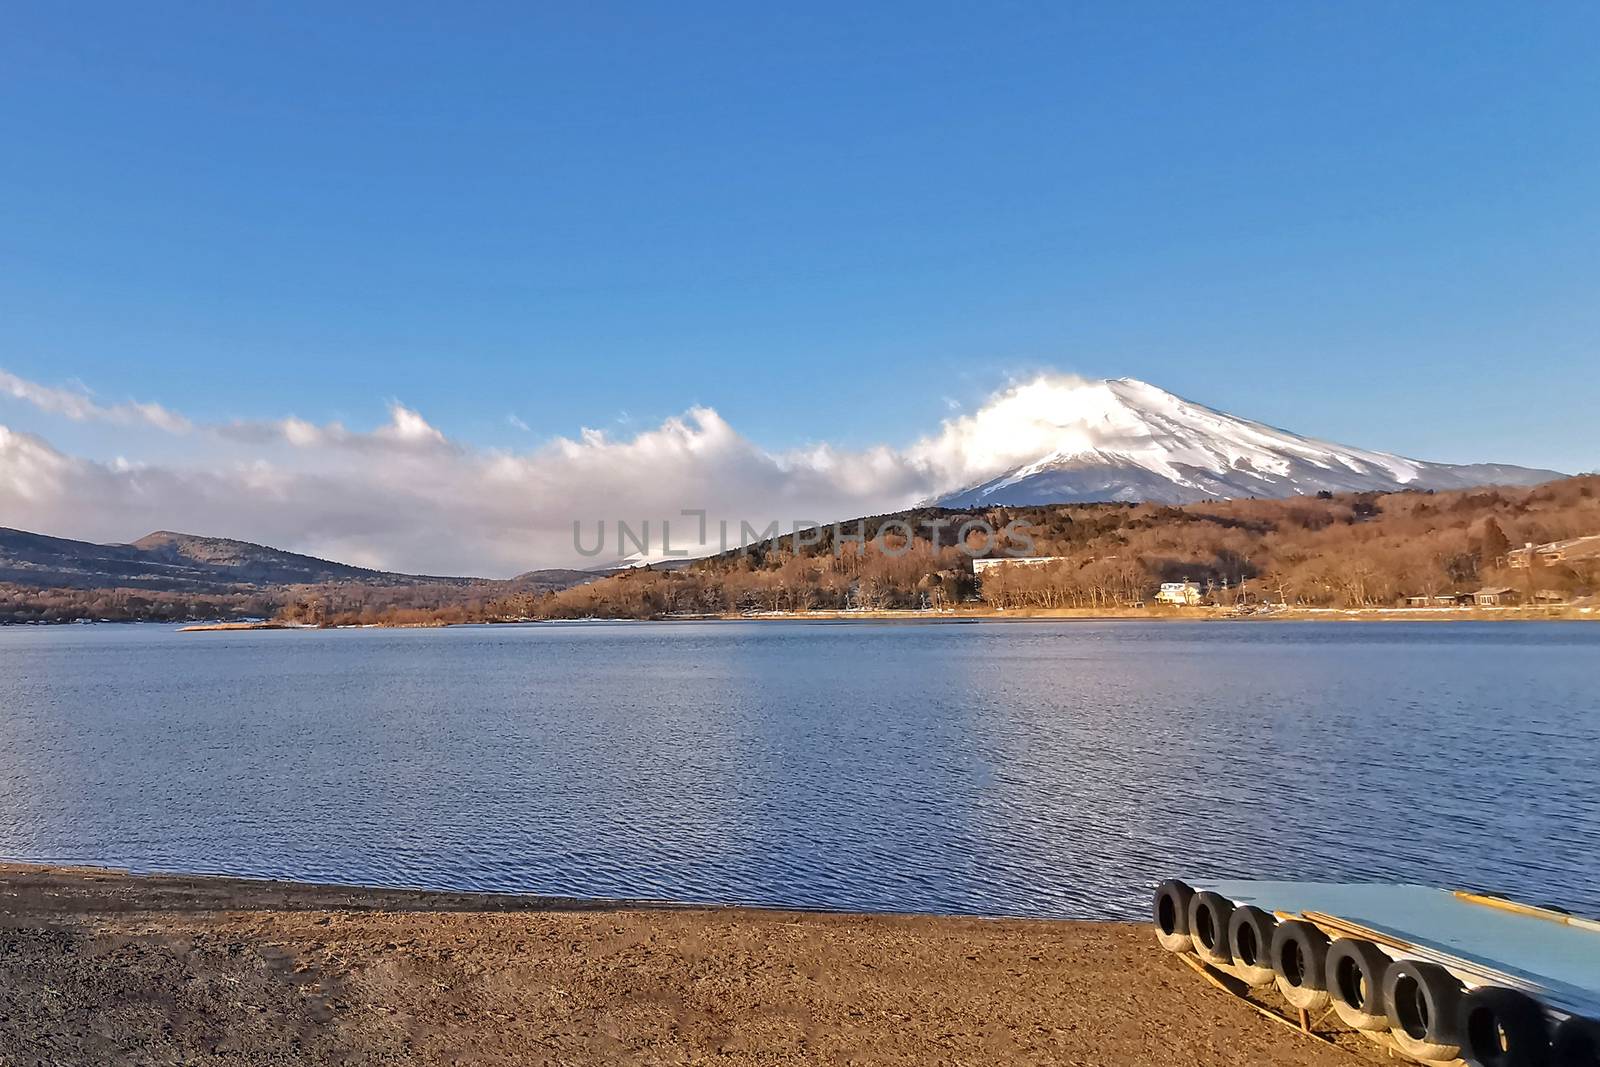 The lake, sky and Fuji mountain with snow in Japan countryside
